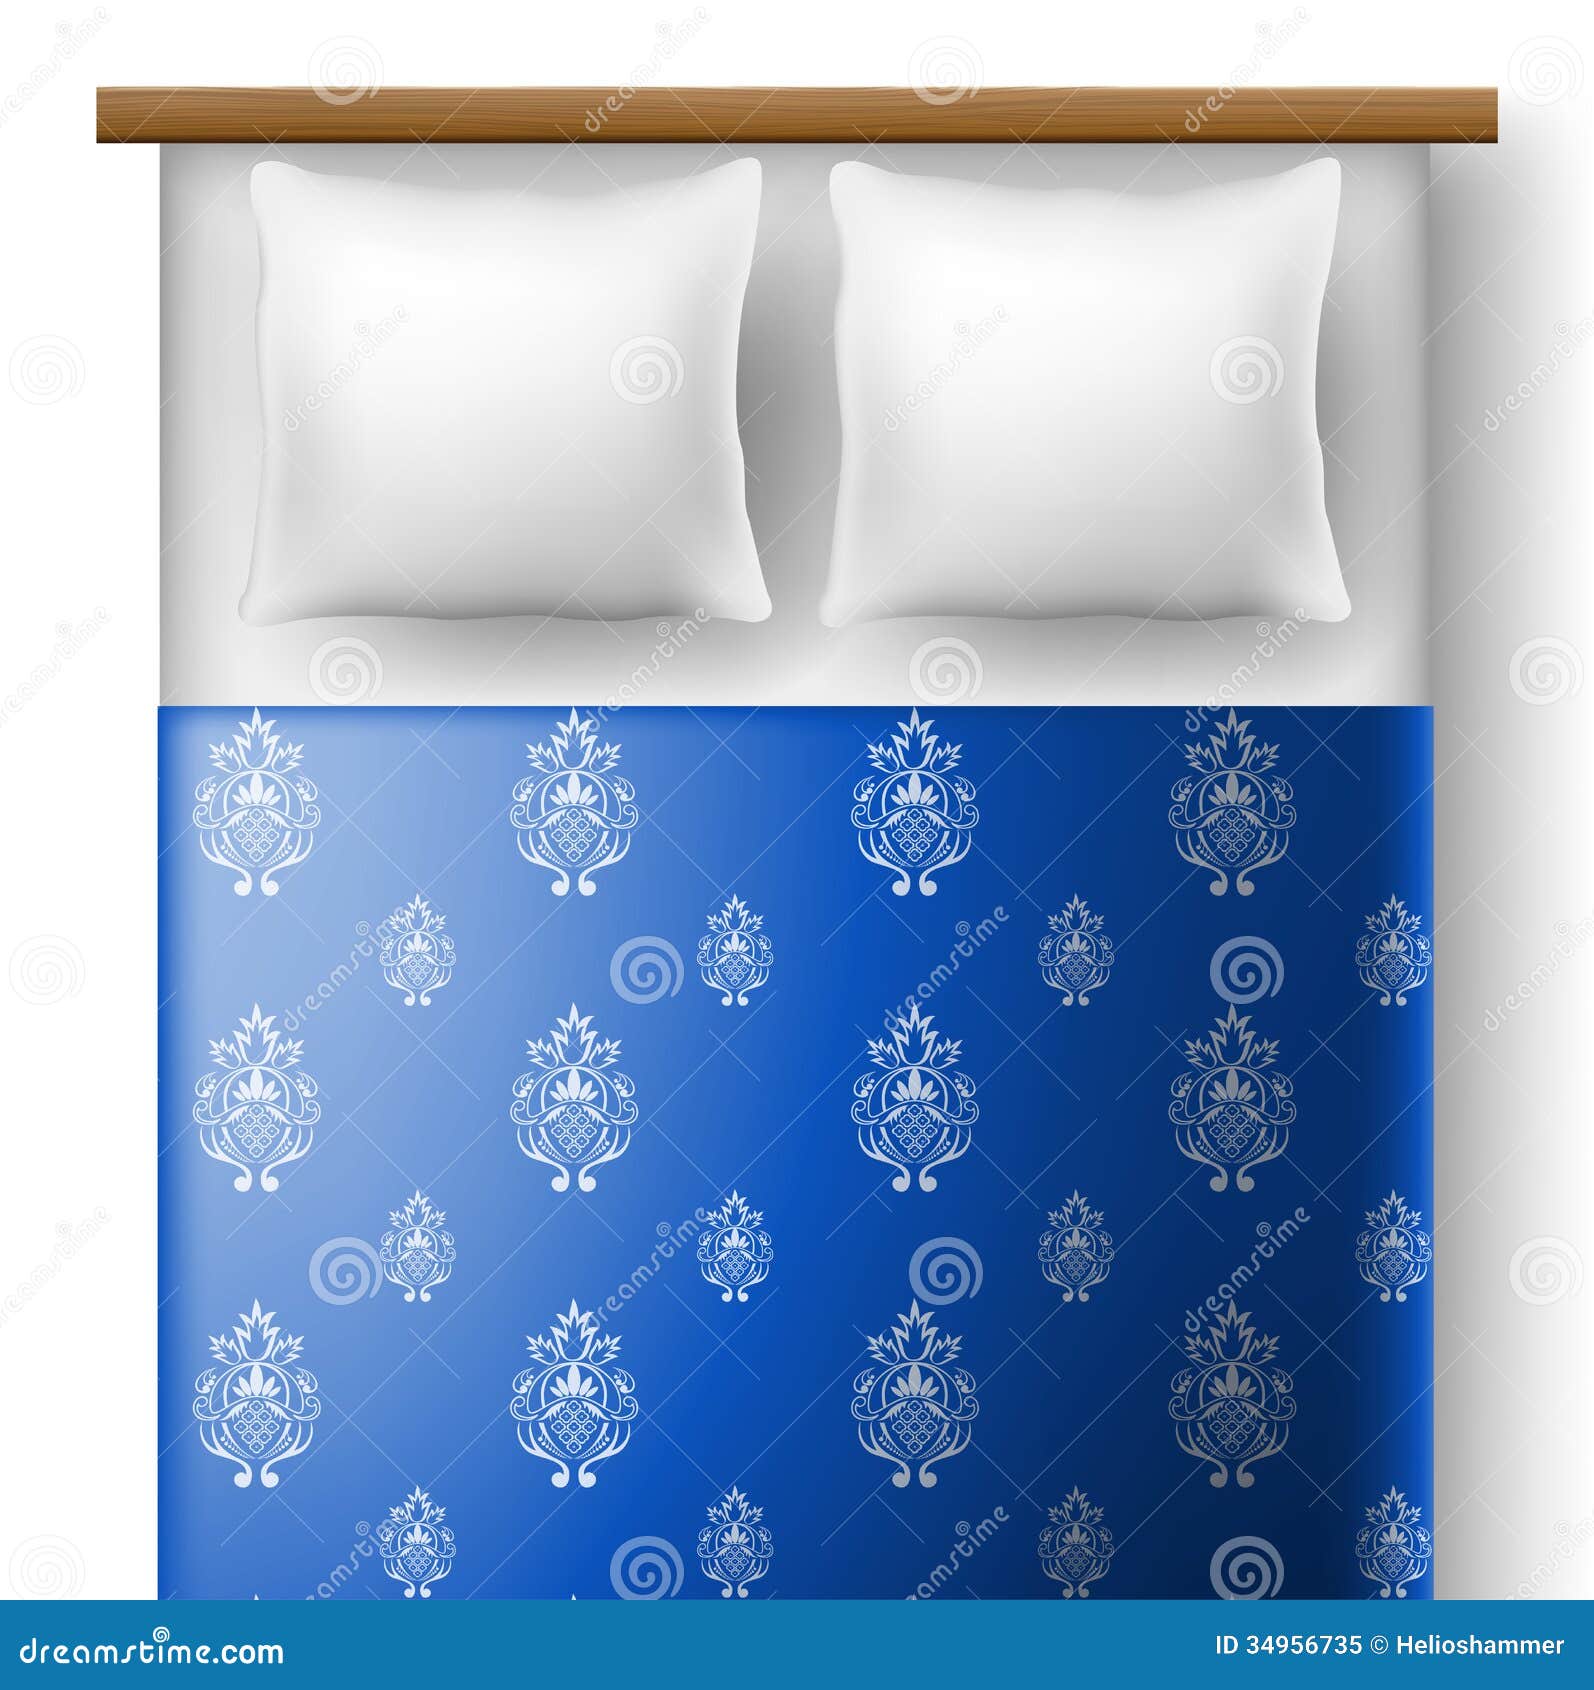 bed-top-view-pillows-blue-patterned-blanket-eps-34956735.jpg